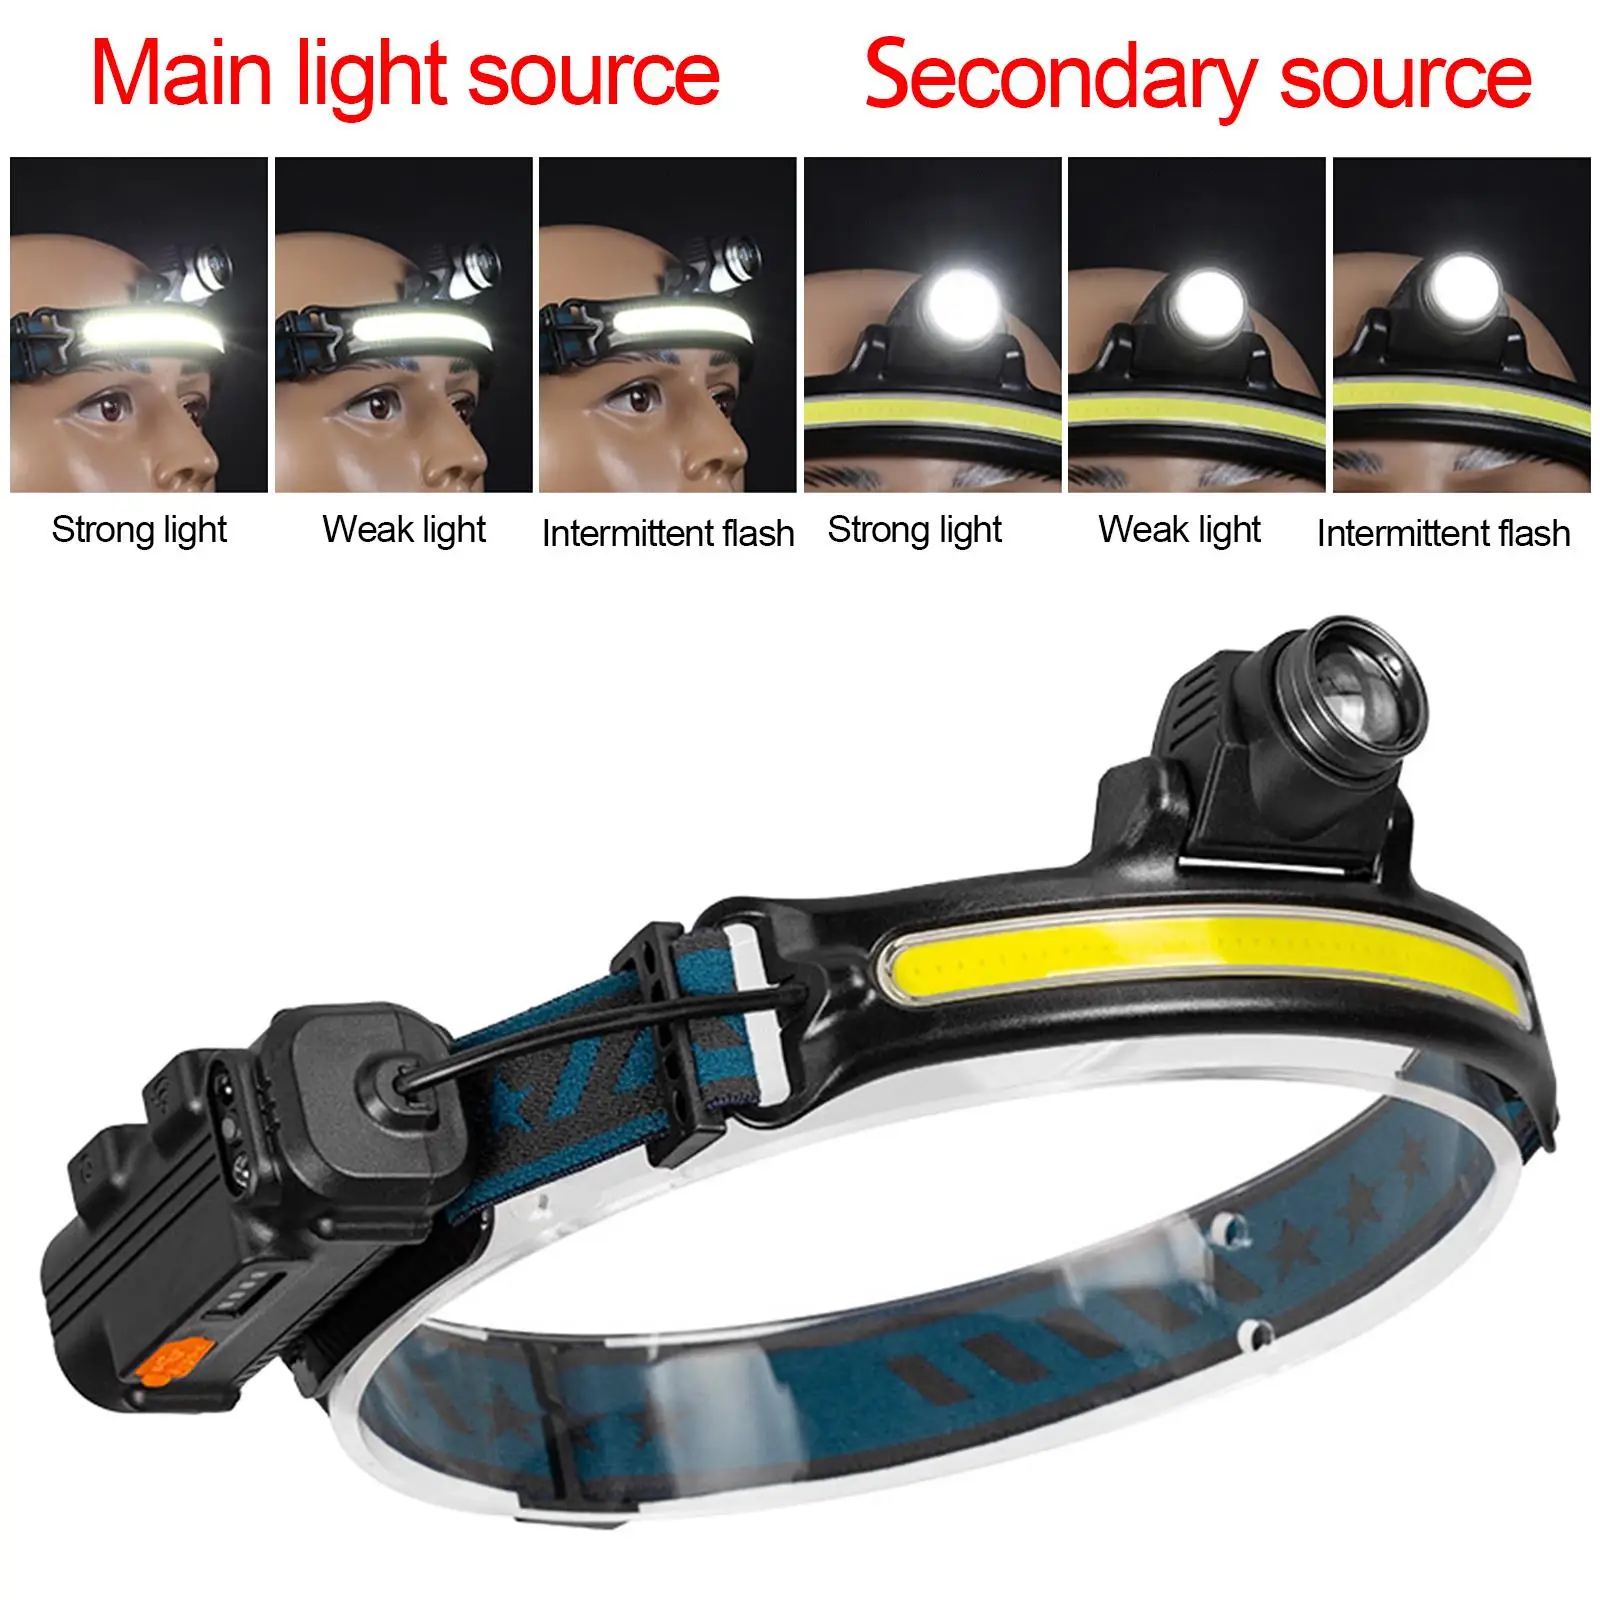 LED Head Torch, Rechargeable Headlamp with 6 Lighting Modes, Head Torch Angle-Adjustable for Camping Running